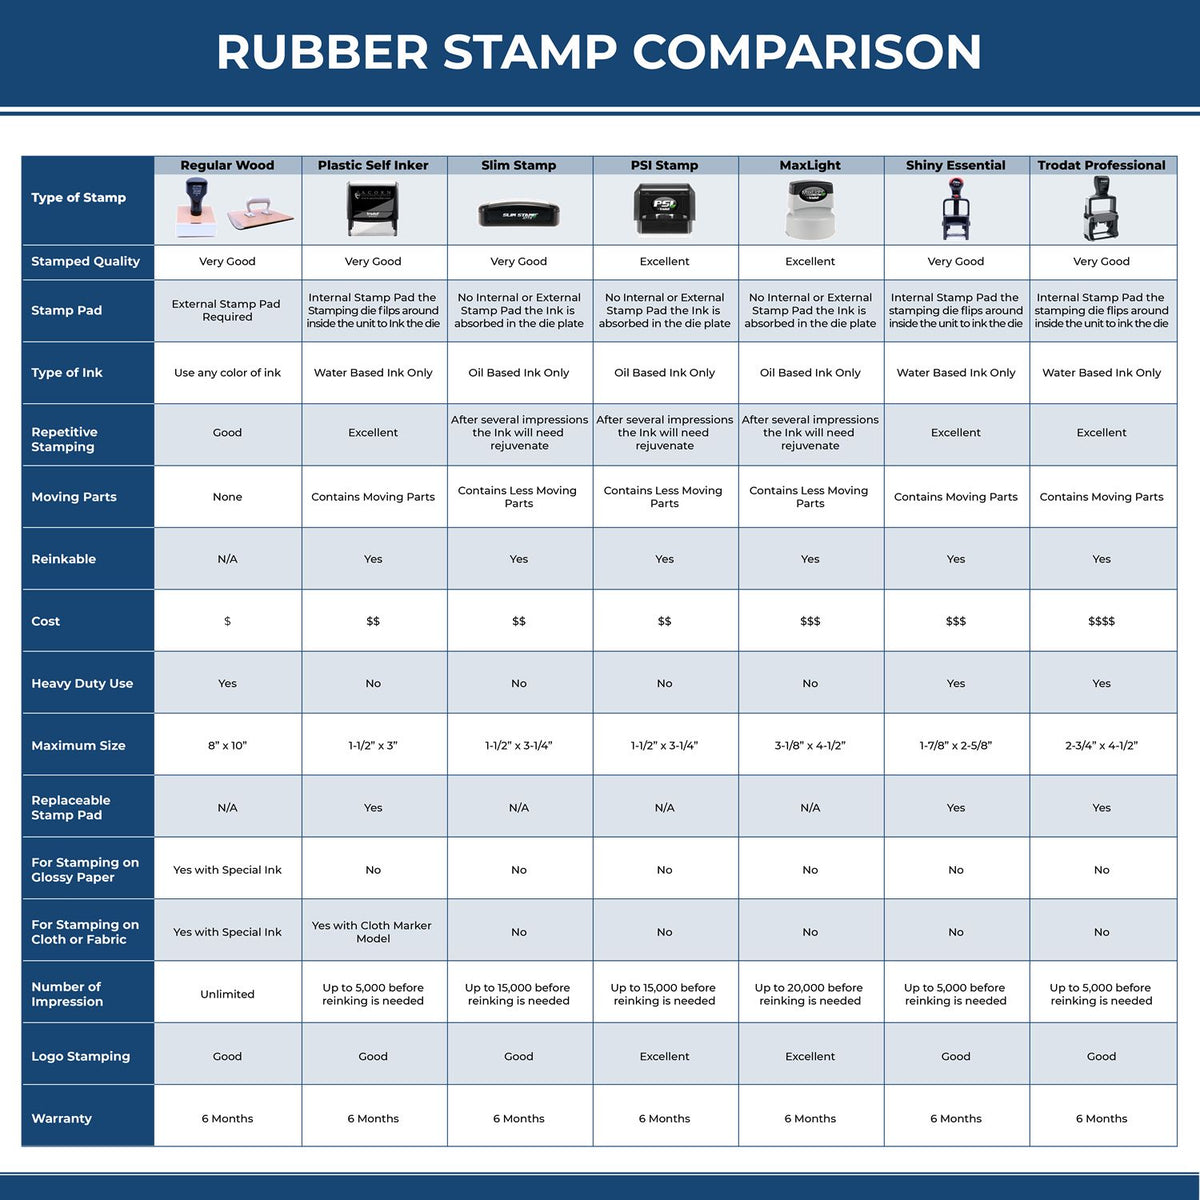 Large Self-Inking Bold Shred Stamp 5588S Rubber Stamp Comparison